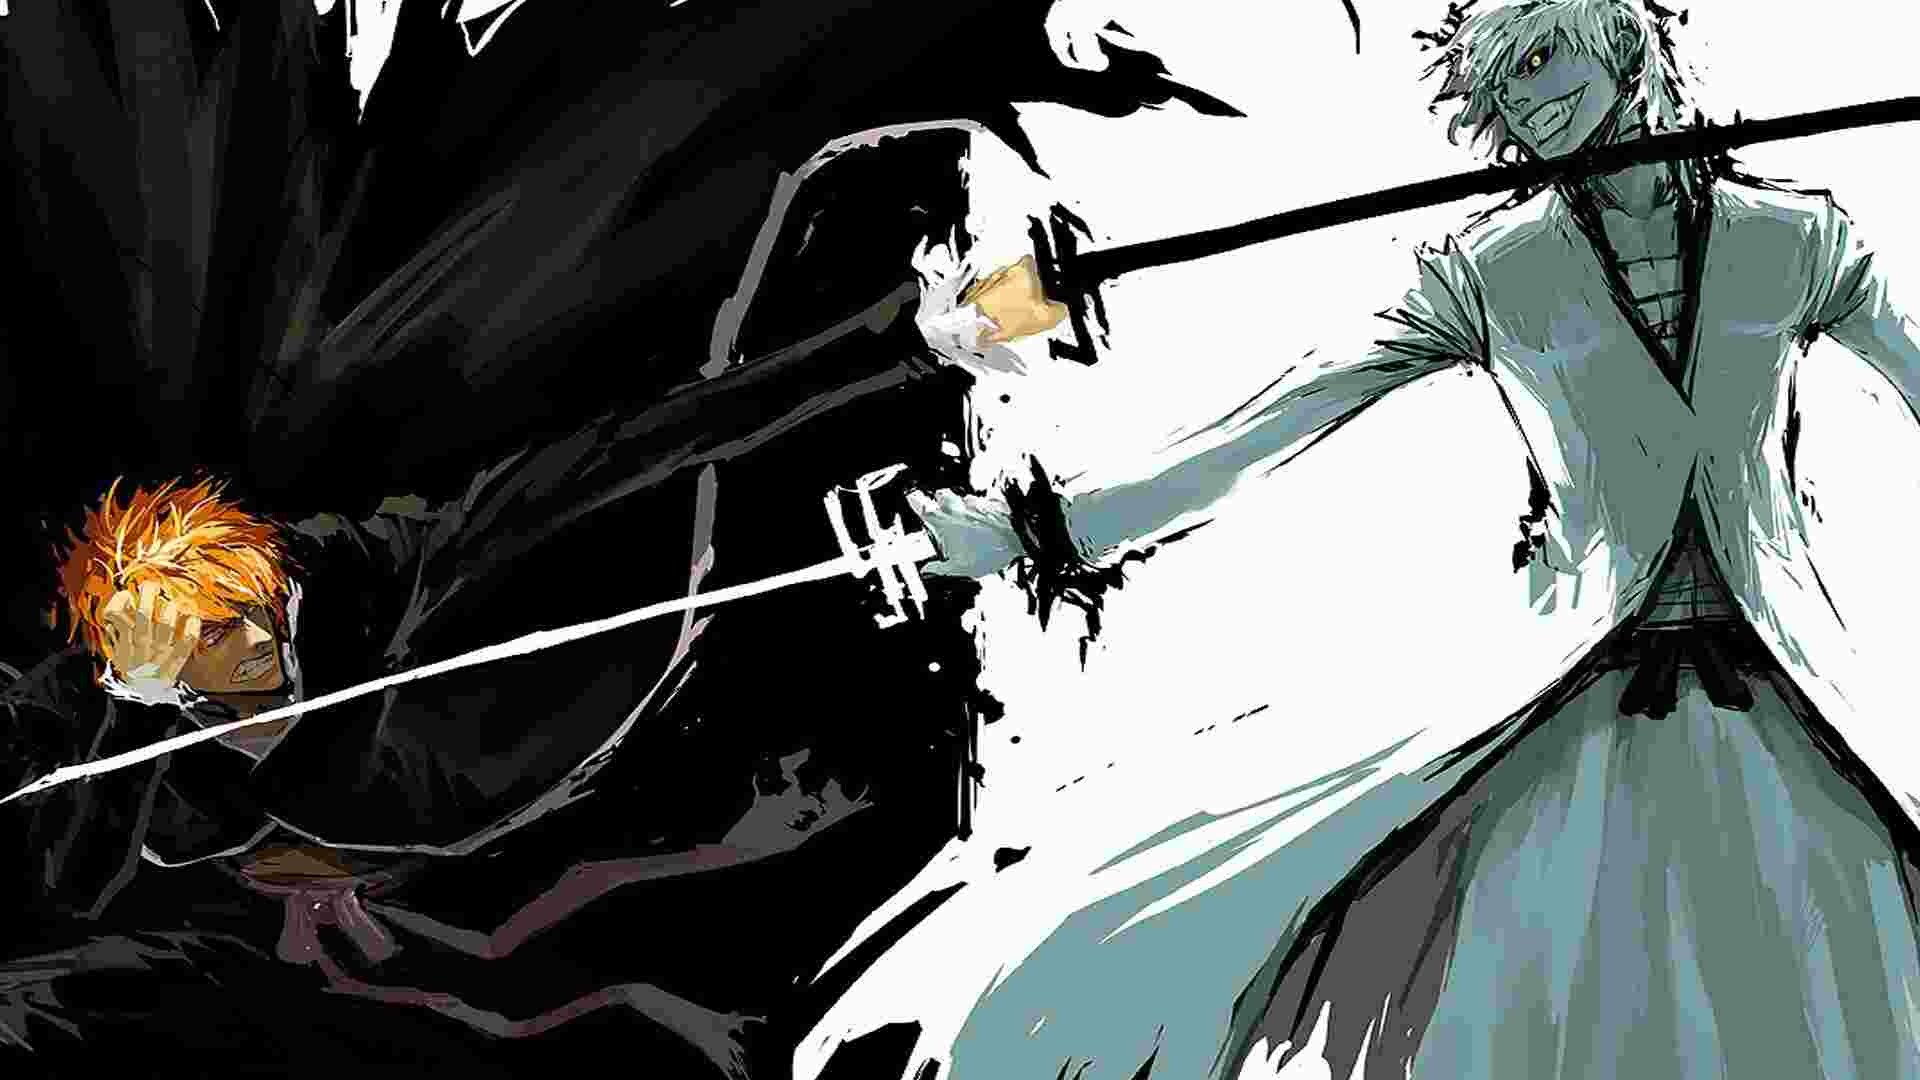 Bleach: Thousand Year Blood War: A Japanese anime television series based on Tite Kubo's original manga series of the same name. 1920x1080 Full HD Background.